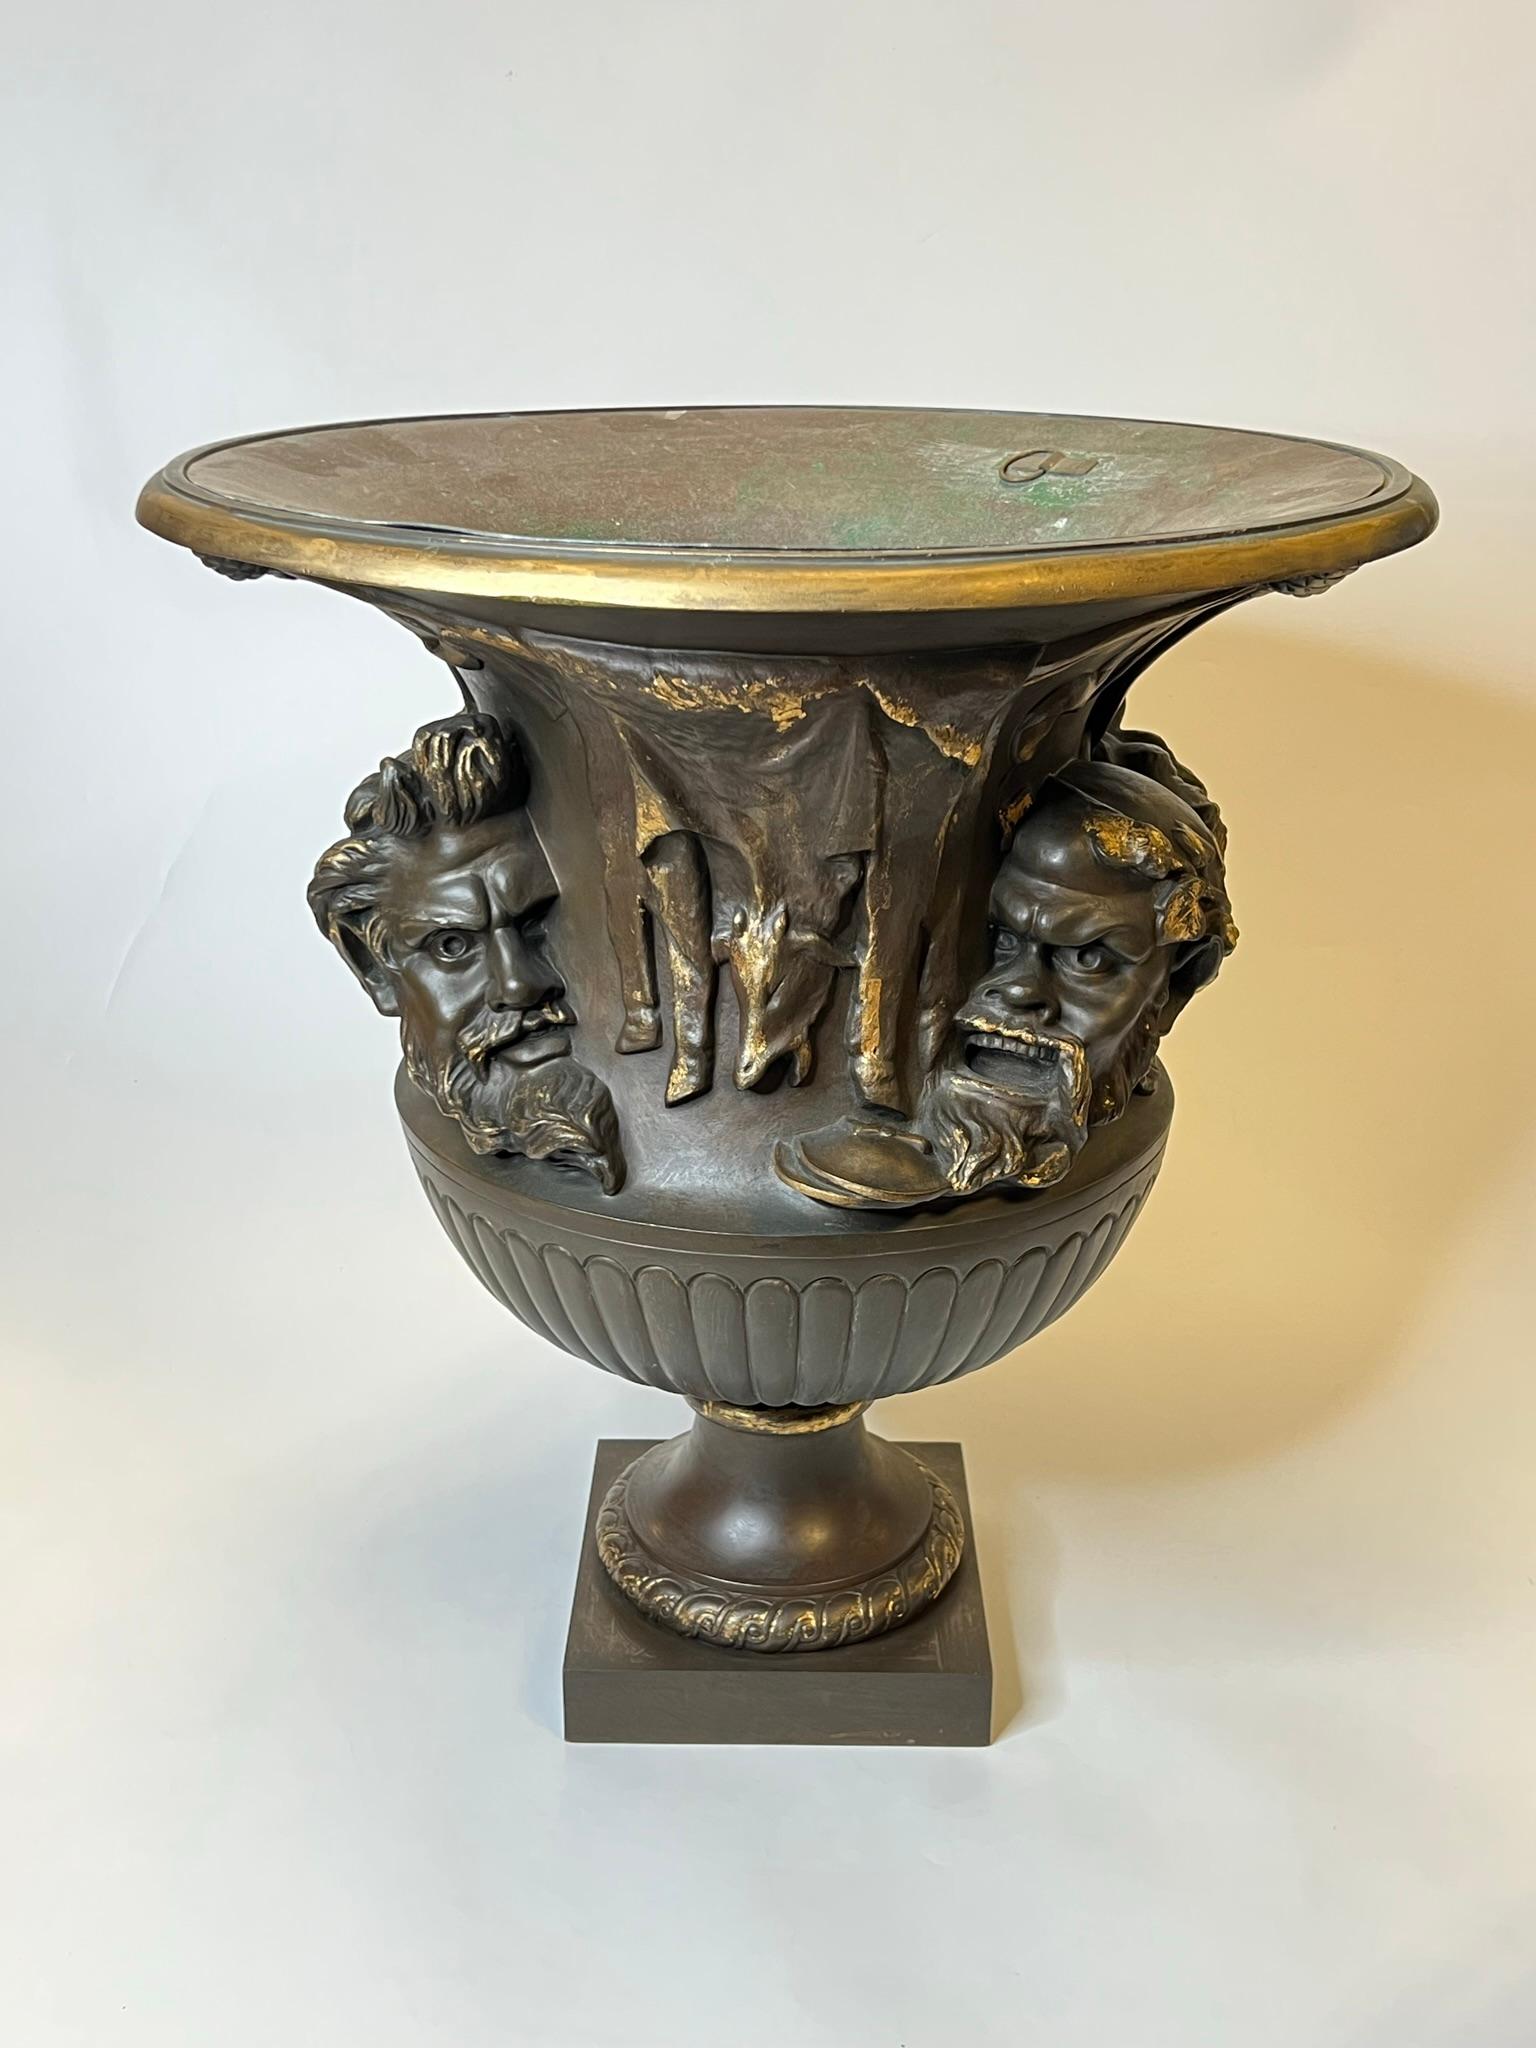 Large Bronze Grand Tour Jardiniere Planter by Barbedienne with neoclassical satyr masks and designs, after the original Borghese vase by Giovanni Zoffoli (1785-1845).  Exceptionally and finished with gilt highlights.  Very Rare.